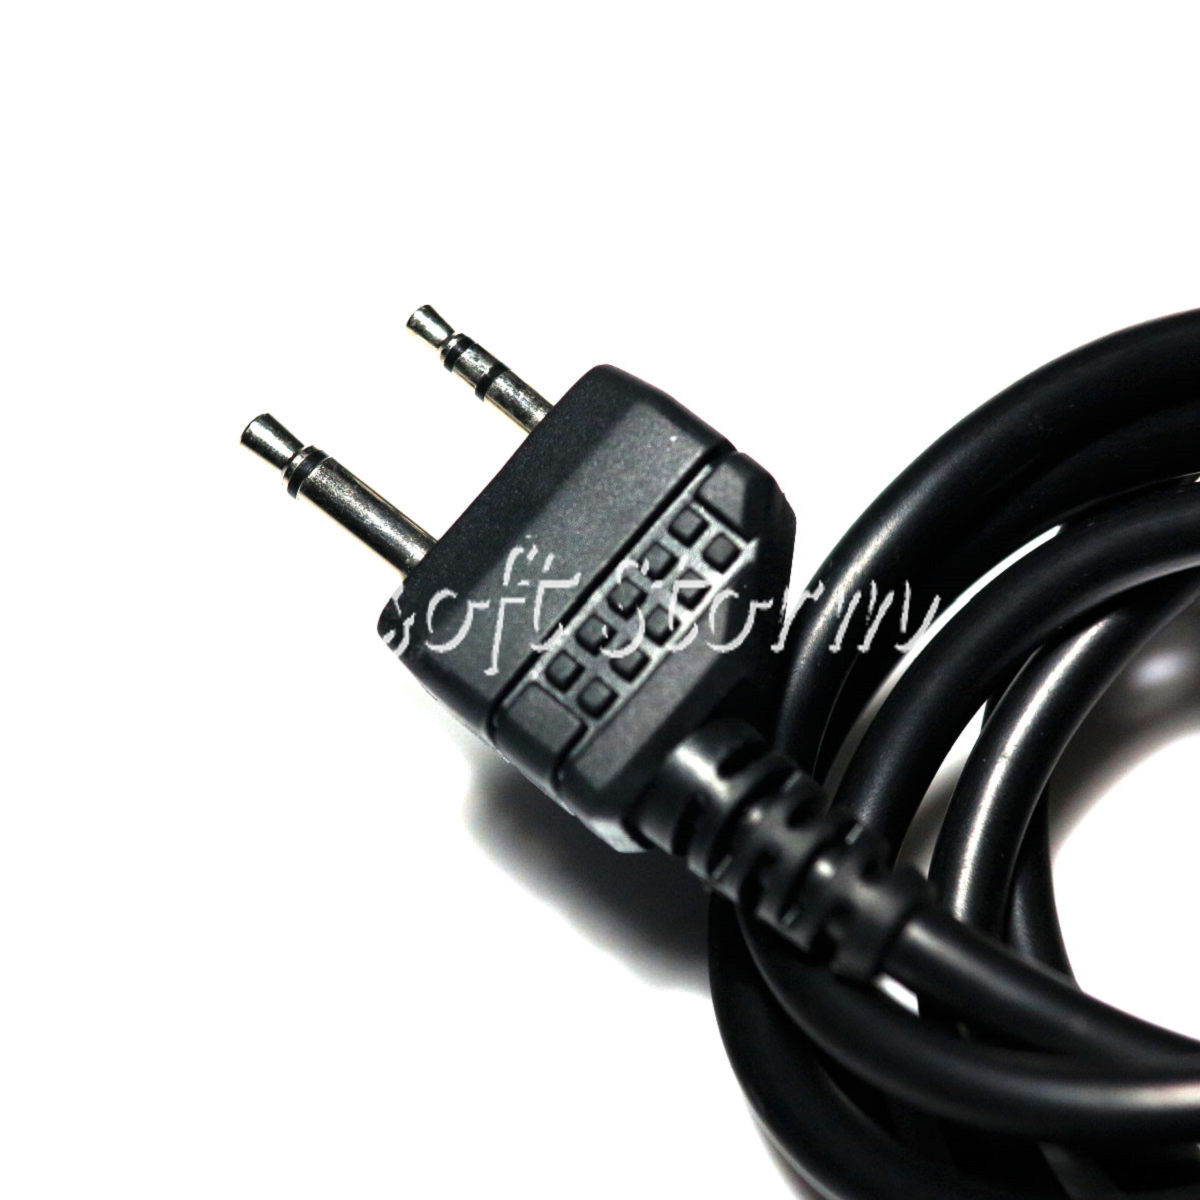 Airsoft SWAT Communications Gear Z Tactical E-Switch Headset PTT for Midland 2 Pin Radio